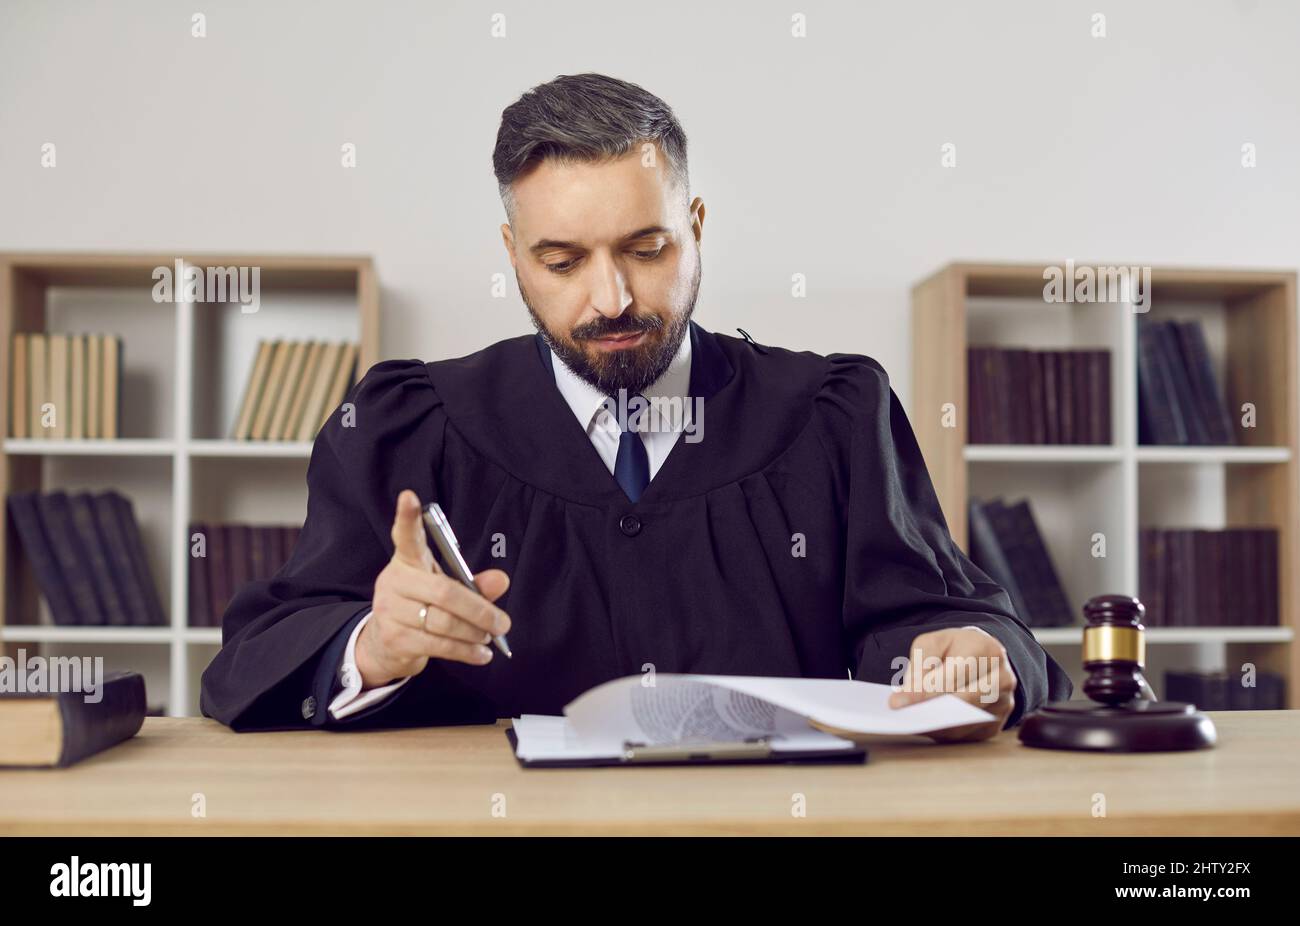 Judge, lawyer or attorney sitting at his table and reading some judicial documents Stock Photo